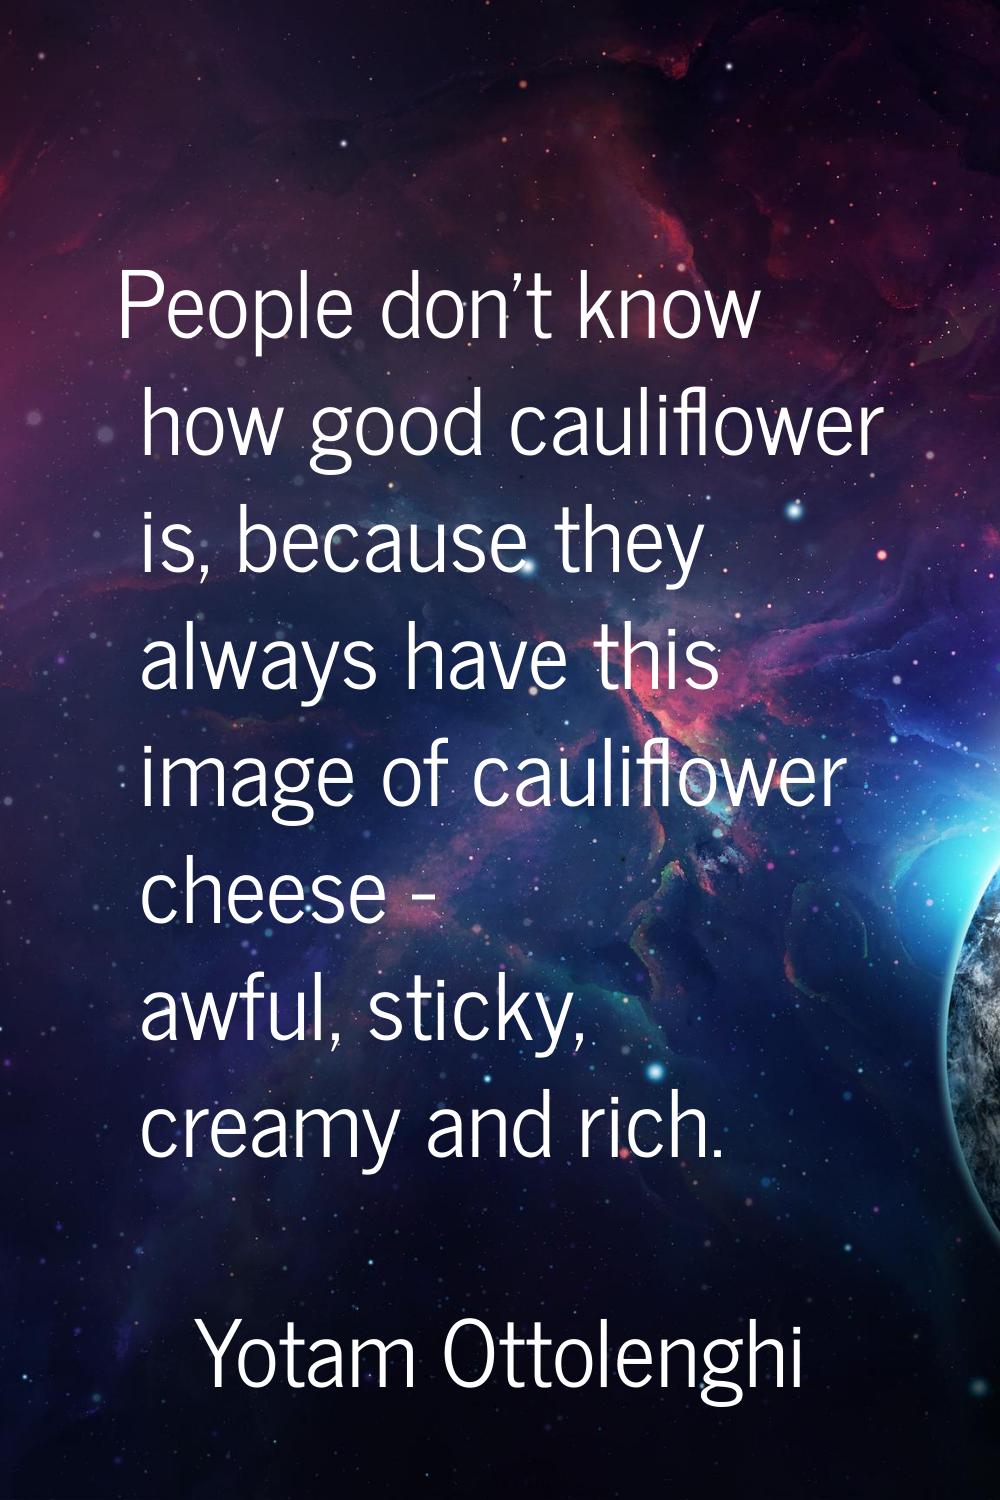 People don't know how good cauliflower is, because they always have this image of cauliflower chees